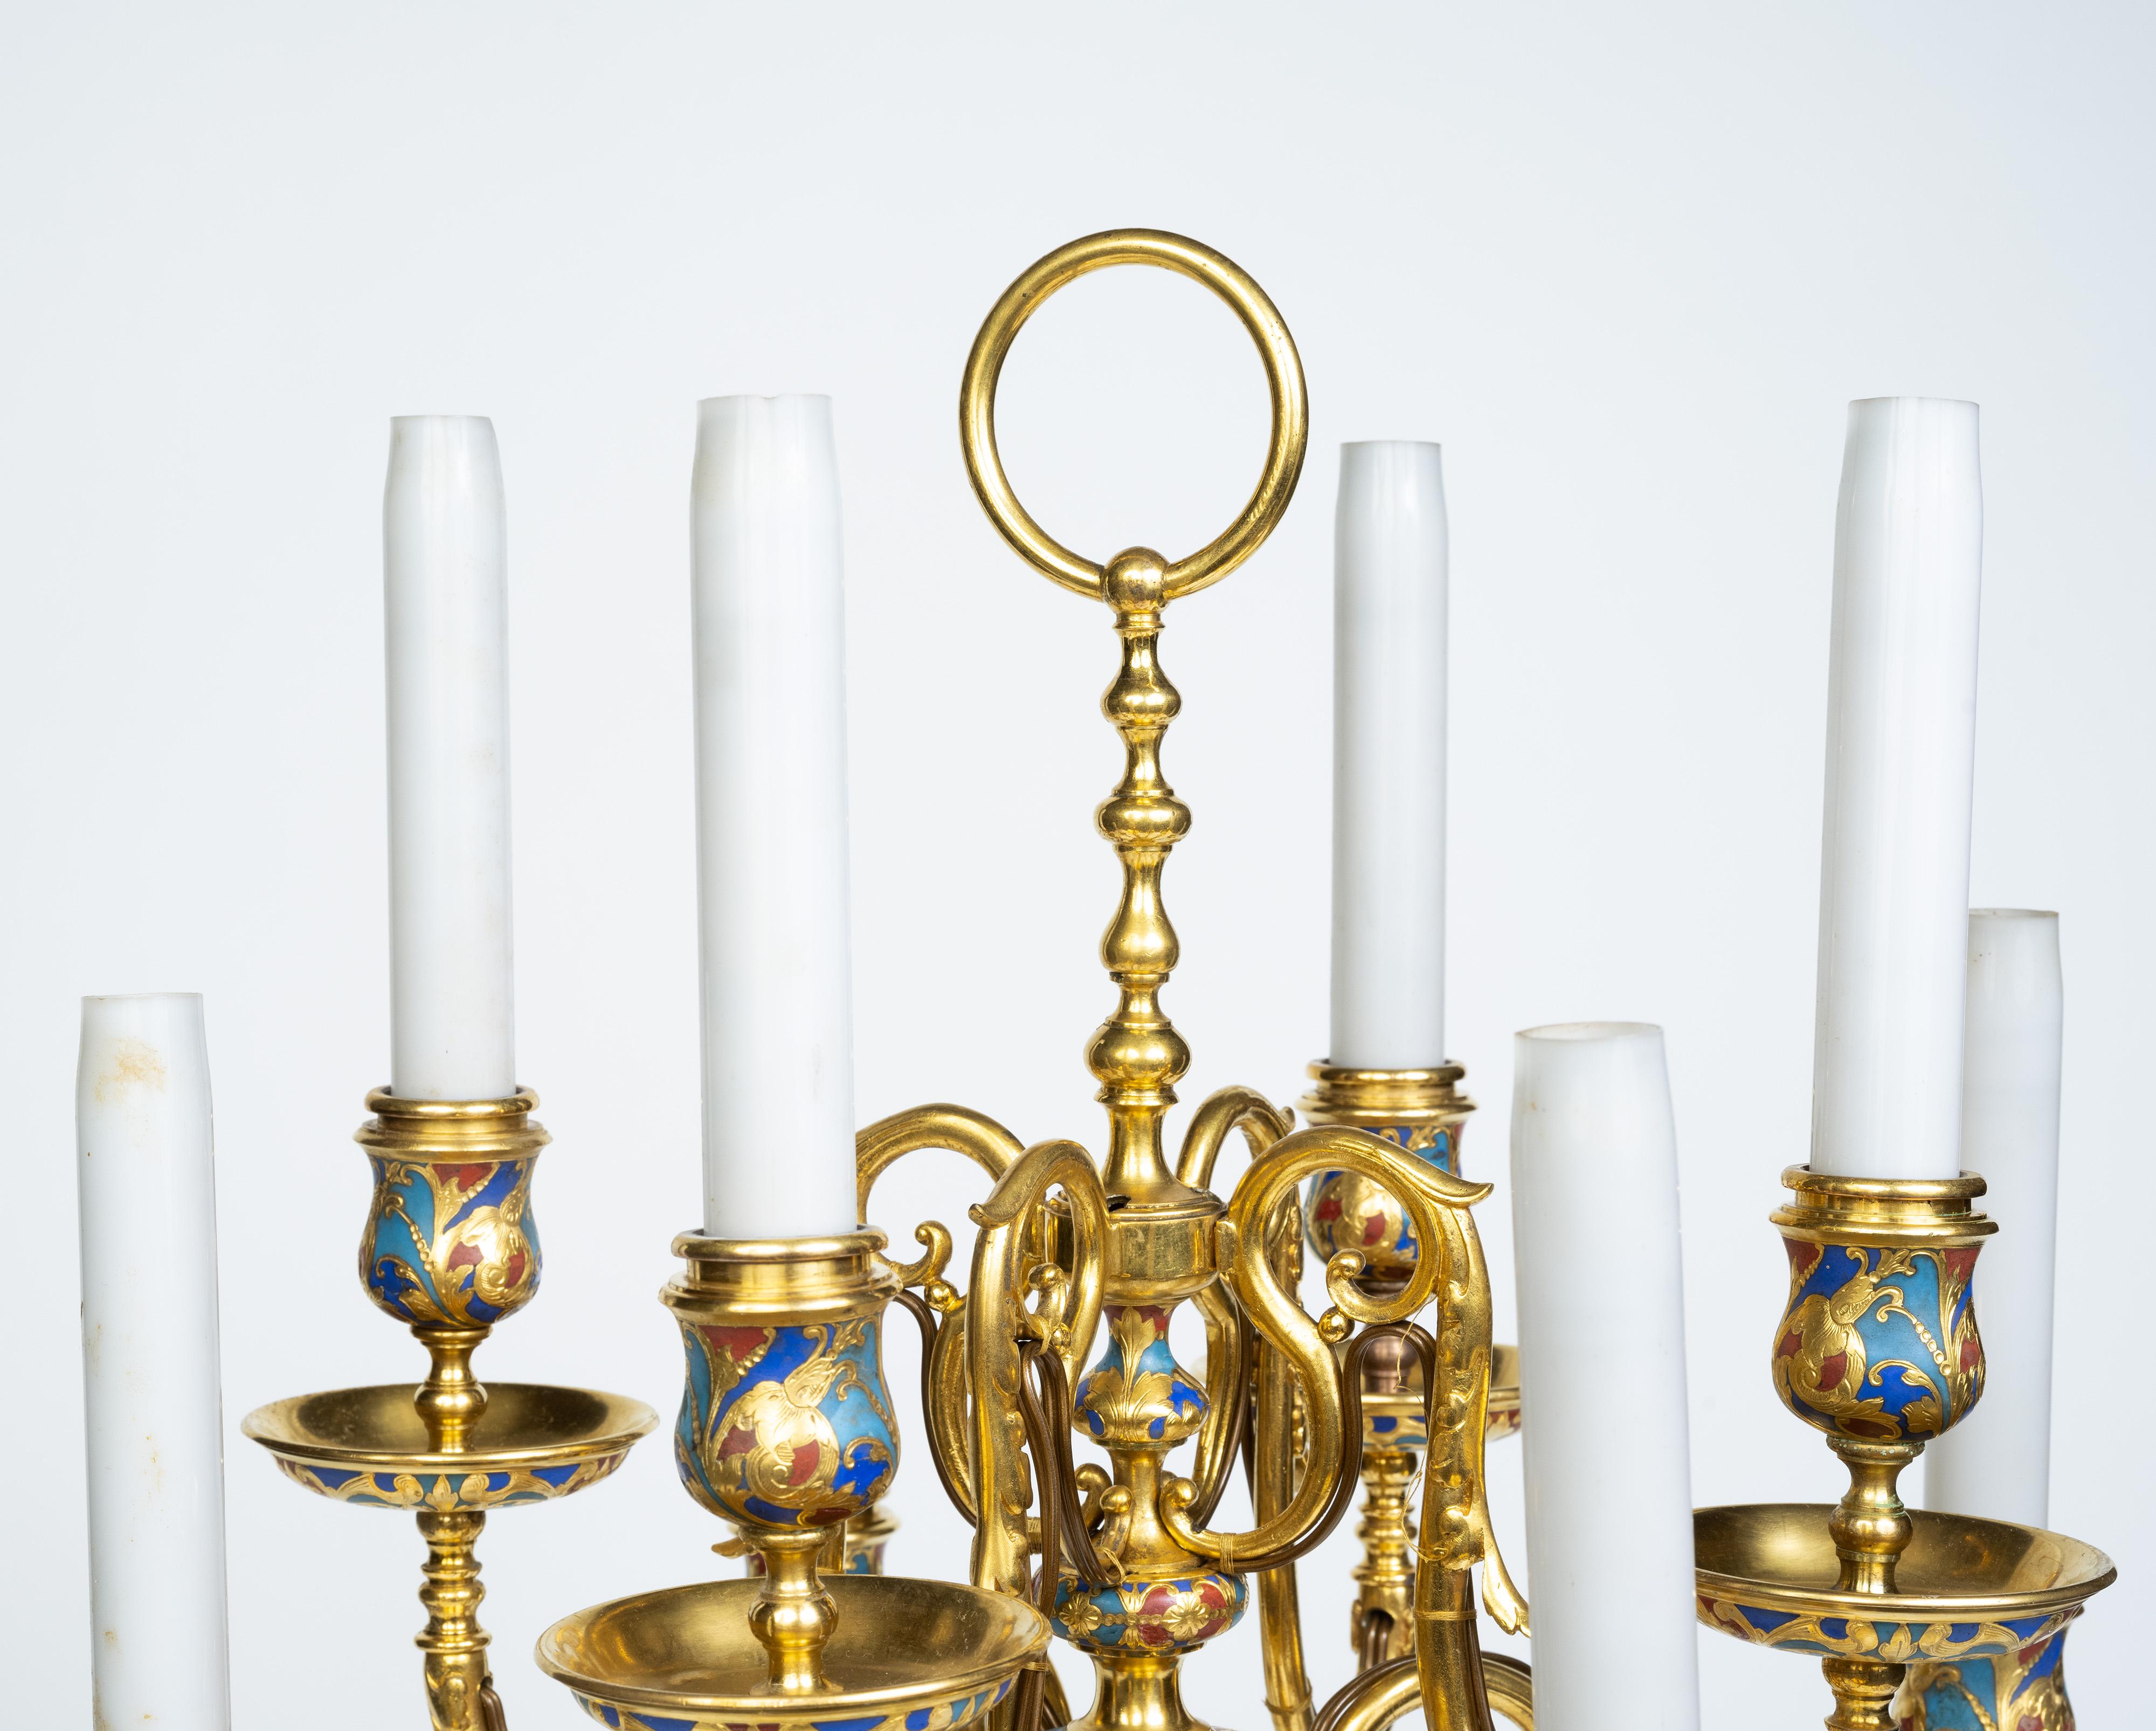 An Exceptional Pair of Champleve Enamel Ormolu Candelabra by Sevin & Barbedienne For Sale 4